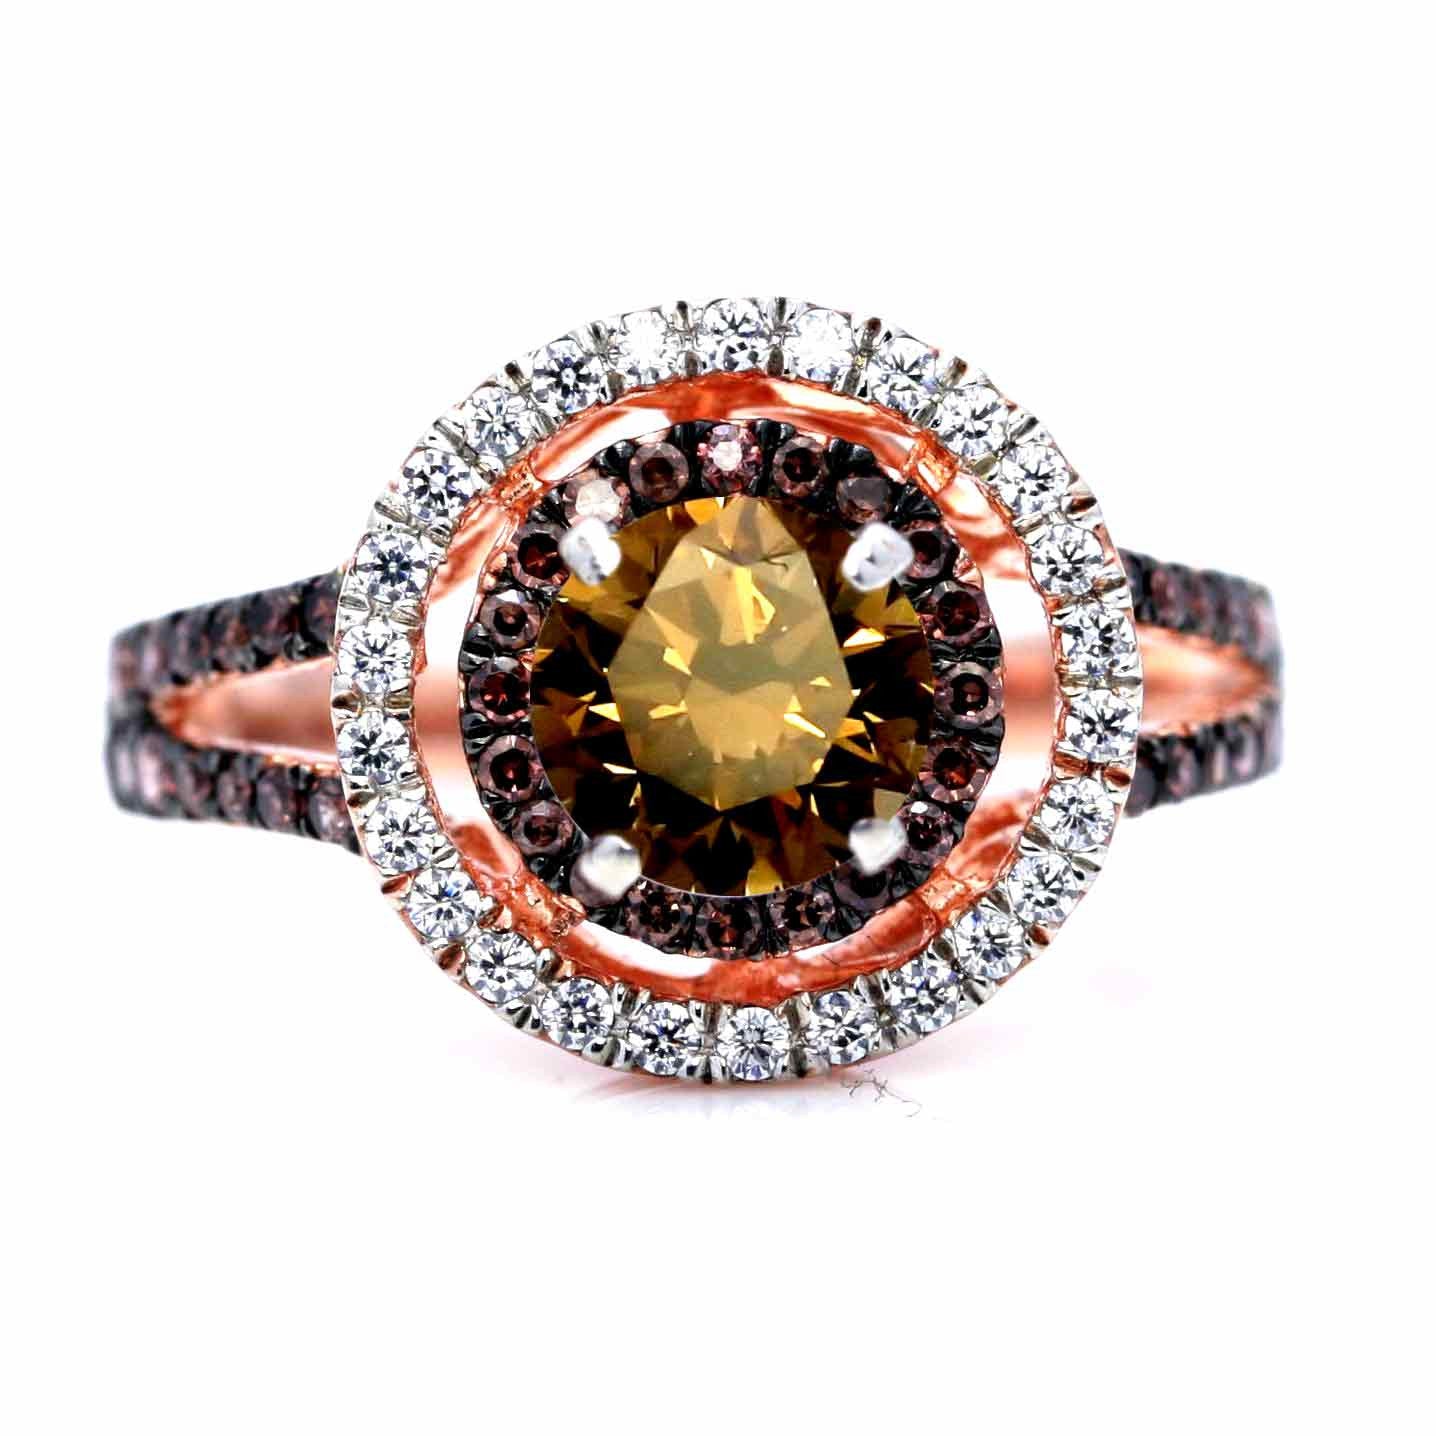 1 Carat Fancy Brown Diamond Floating Halo Rose Gold Engagement Ring, White & Brown Diamond Accent Stones, Anniversary Ring - BD94612